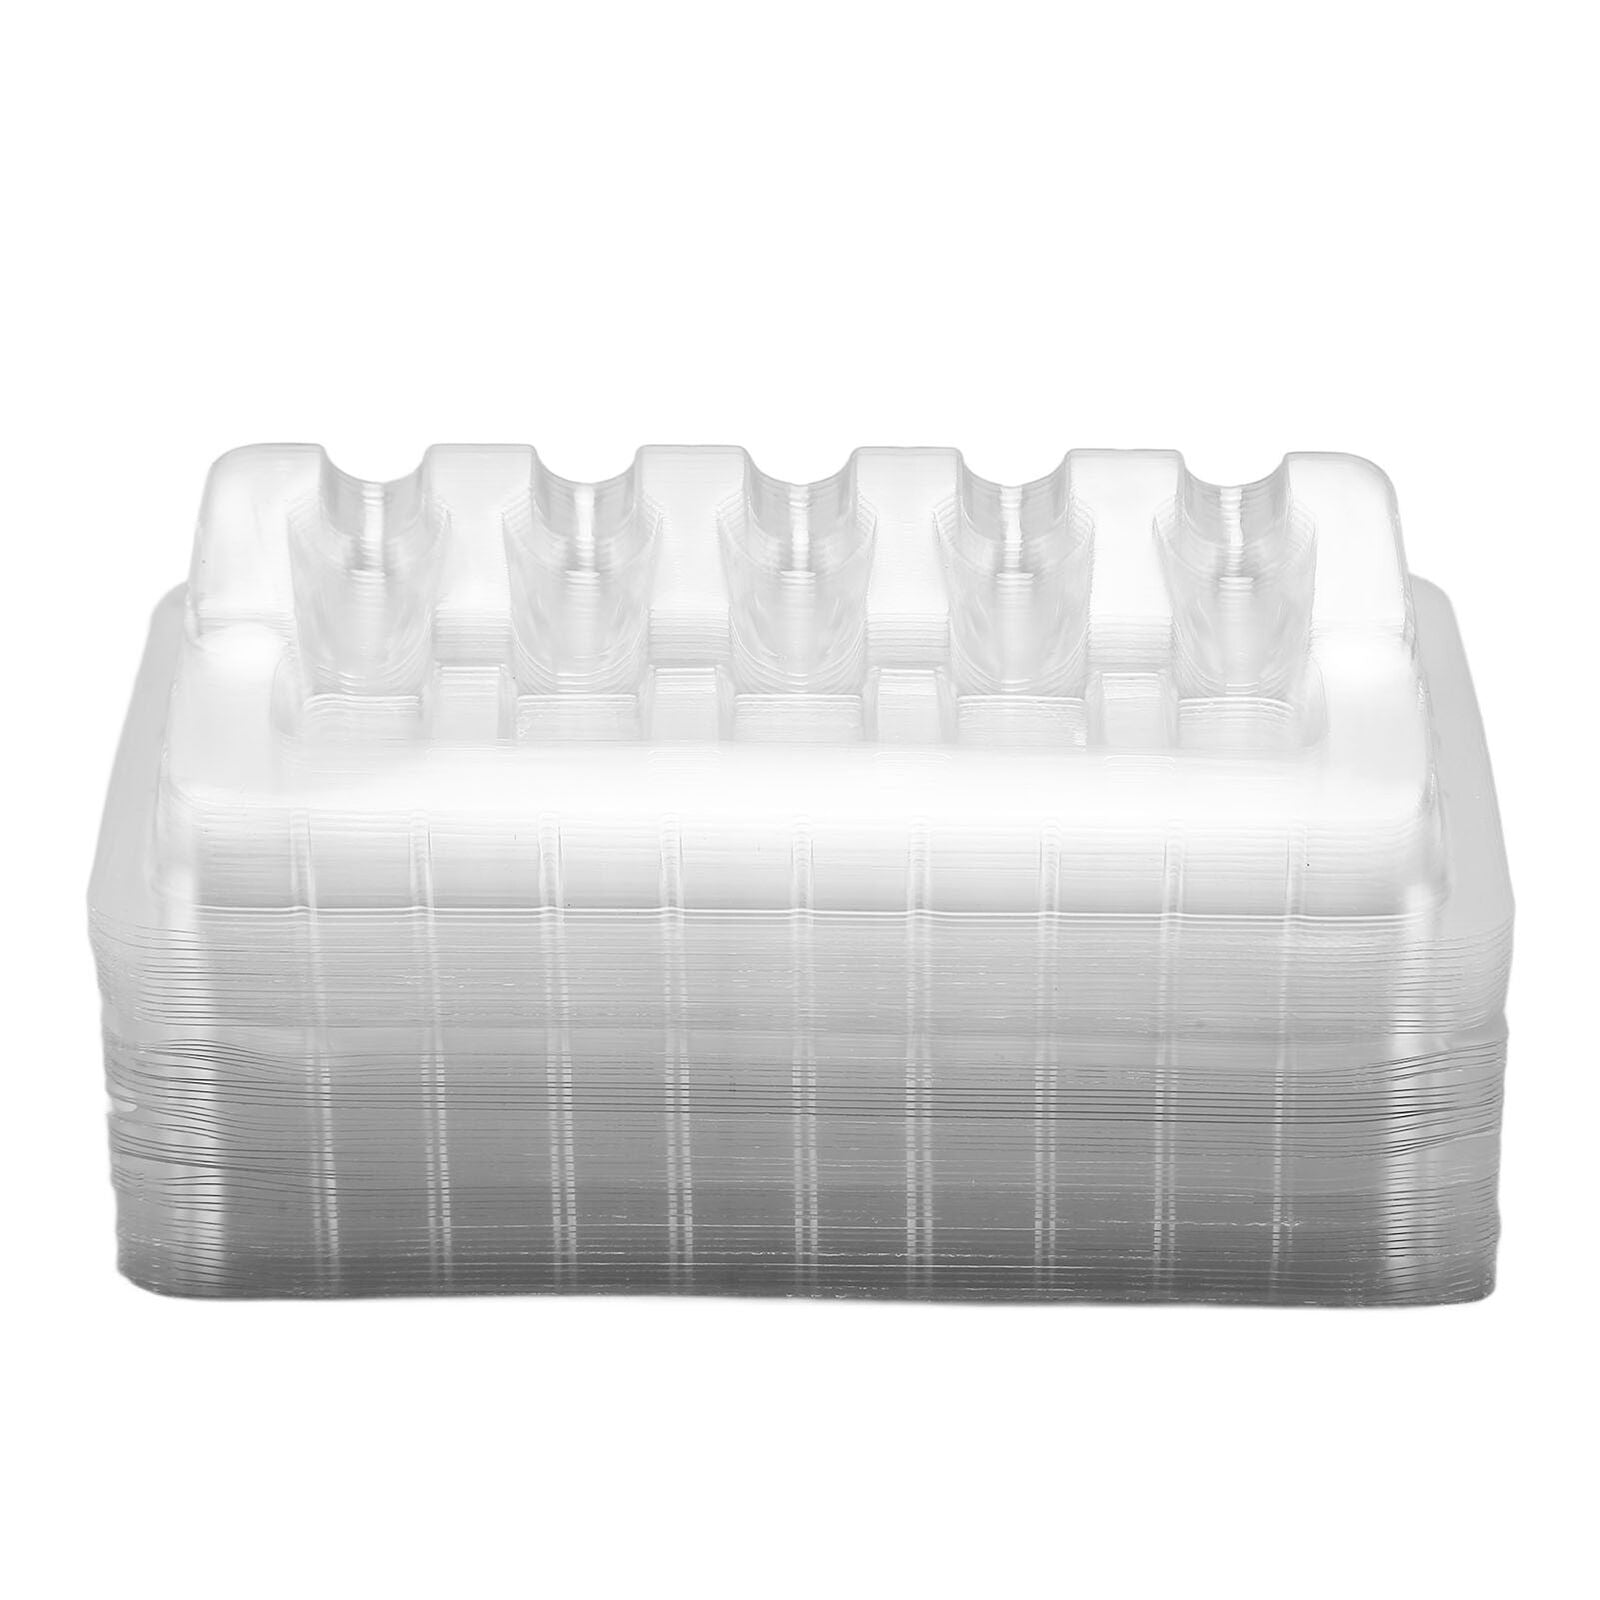 Pack of 25 clear disposable cartridge trays for tattoo artists